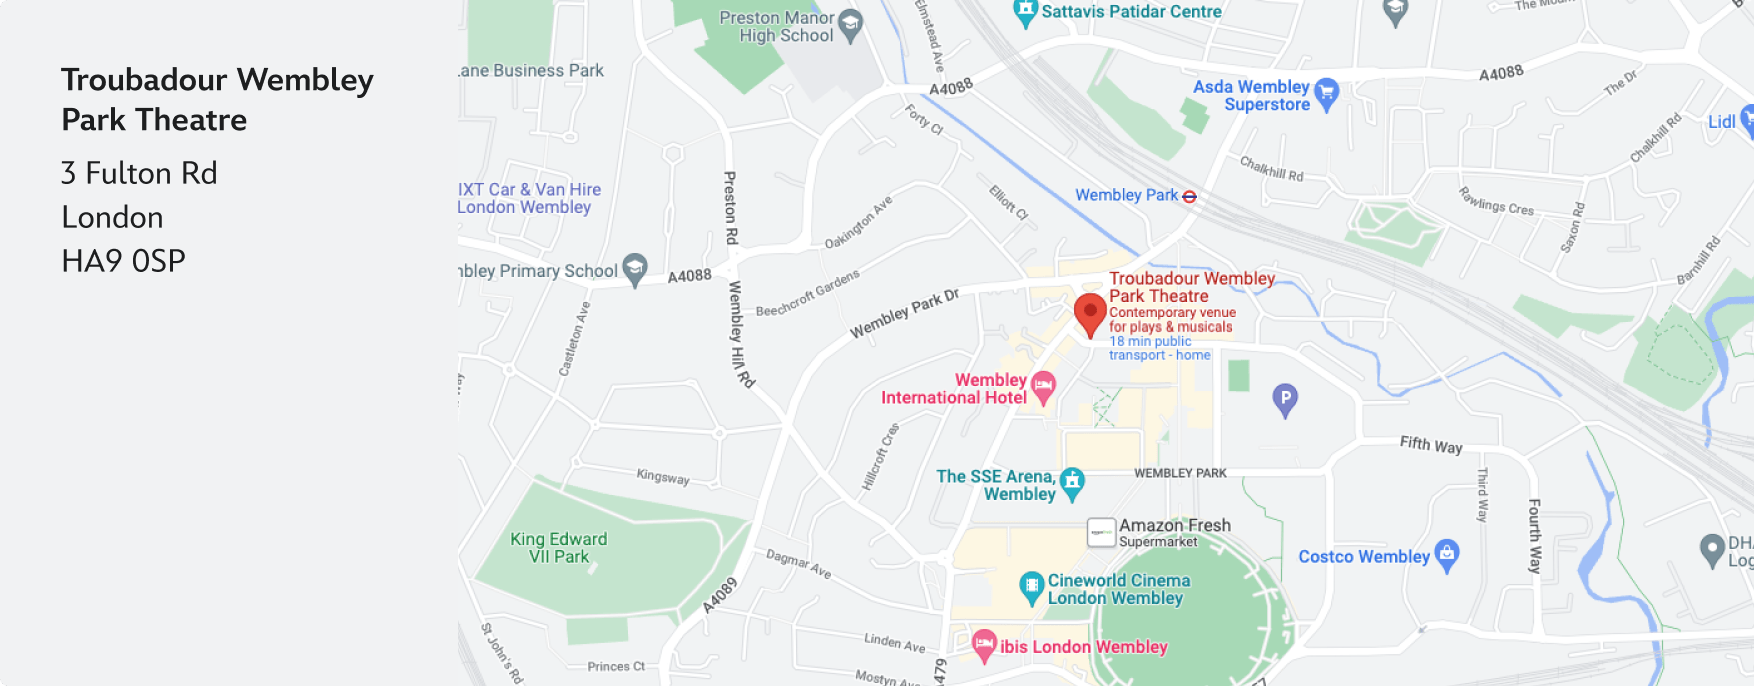 Street map of the Troubadour Theatre in Wembley Park, London